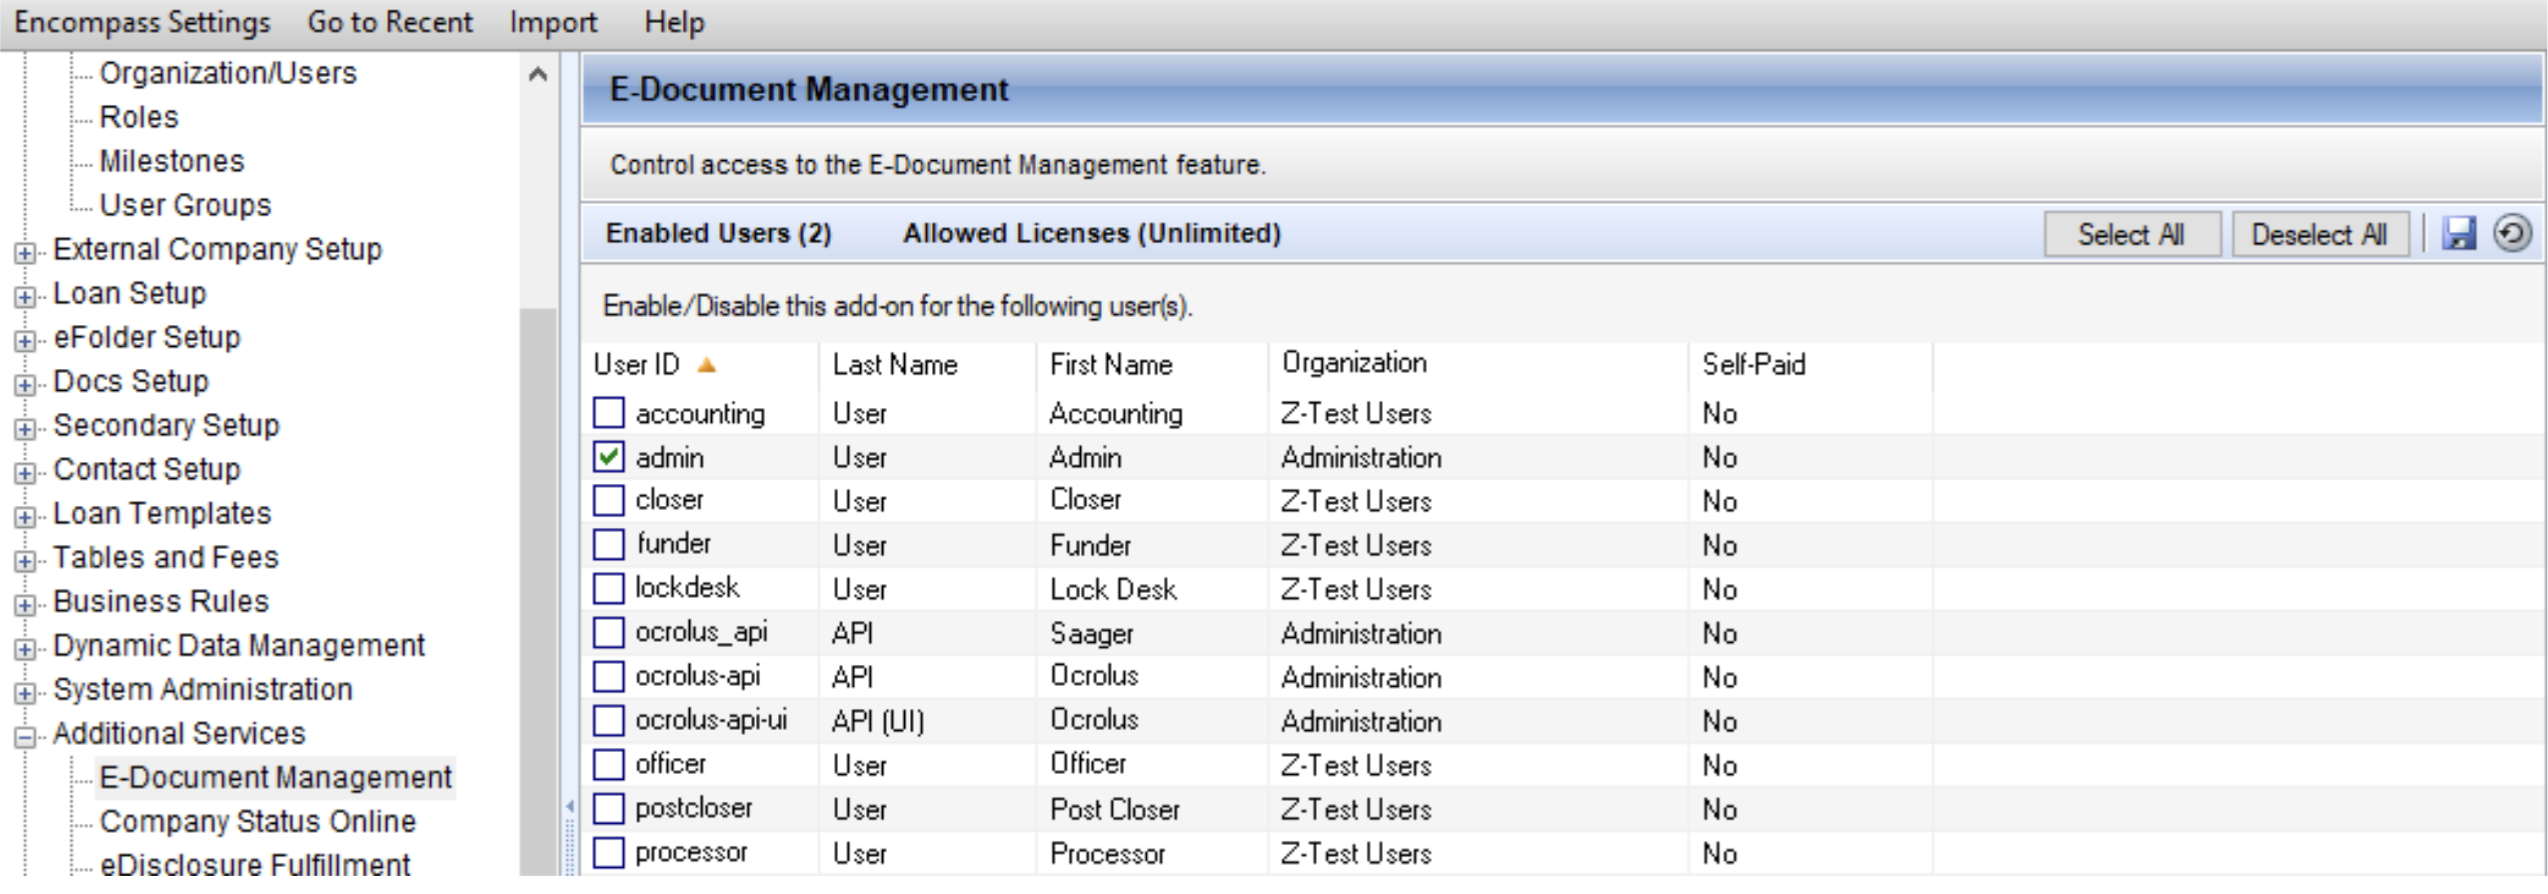 The E-Document Management settings for **Additional Services.** The Ocrolus-API user is shown as an option to add for **E-Document Access**, with a checkbox next to the profile